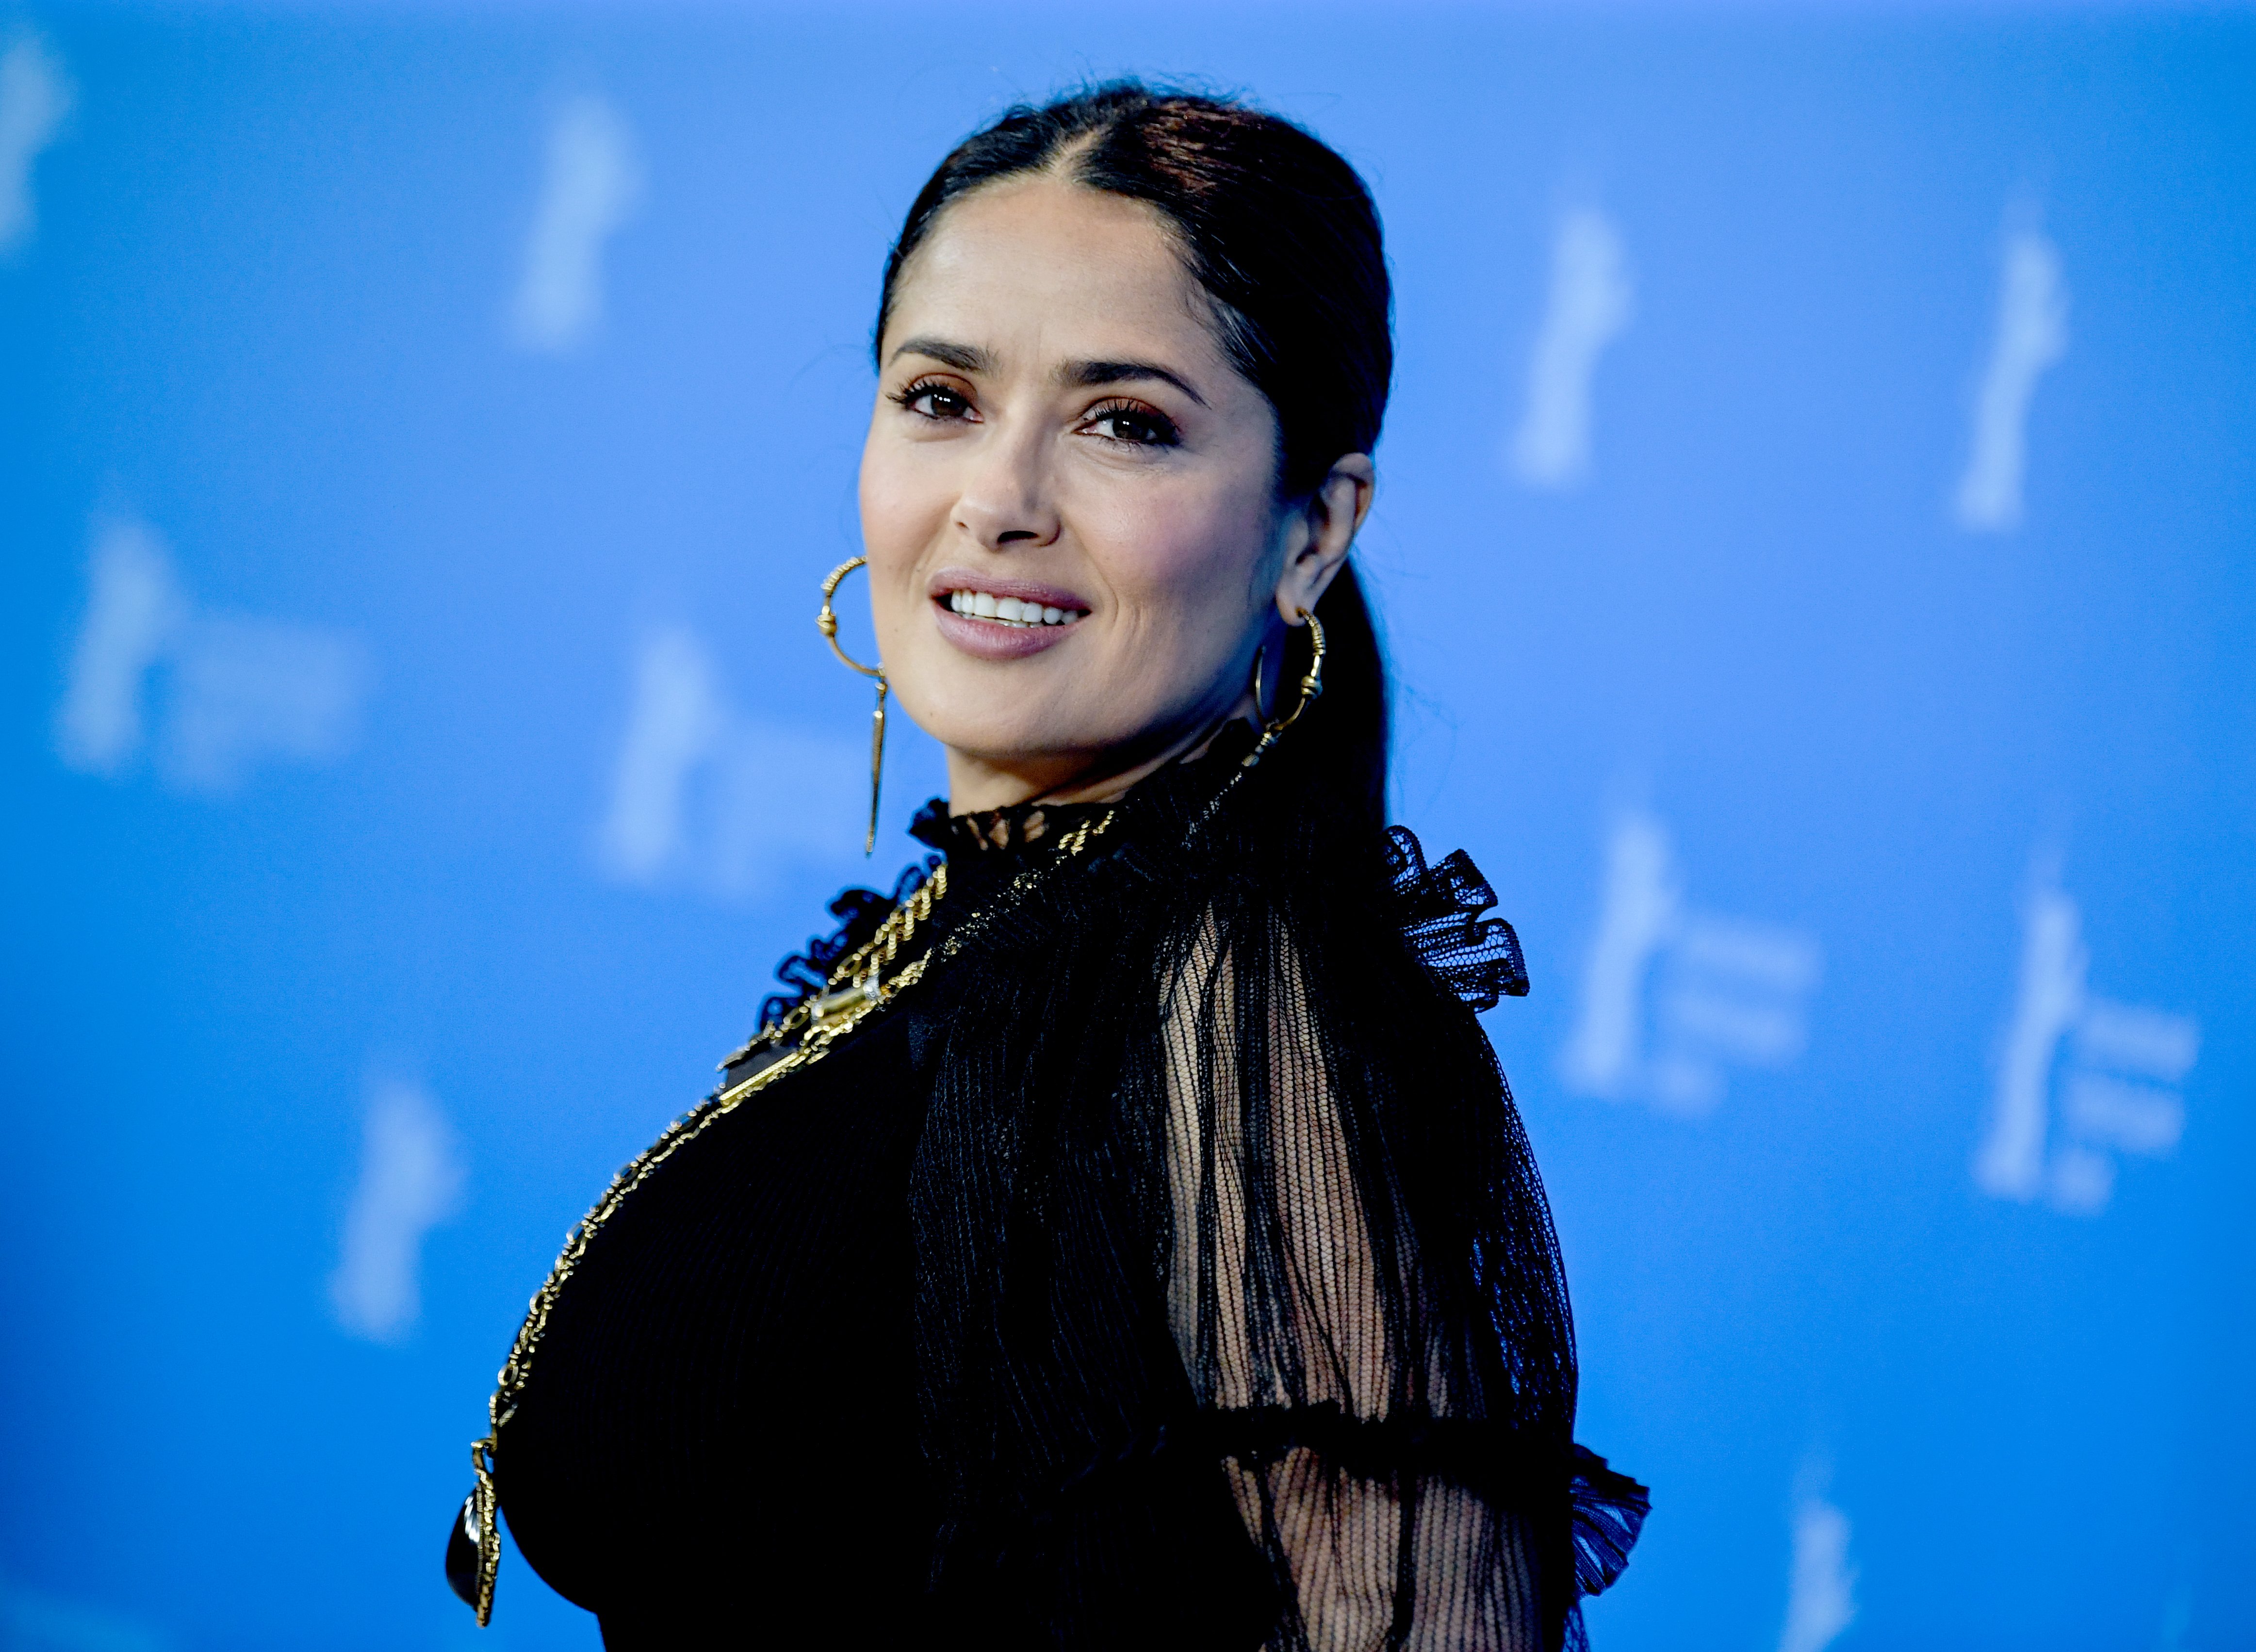 Salma Hayek attends a photocall in Berlin on February 26, 2020. | Source: Getty Images